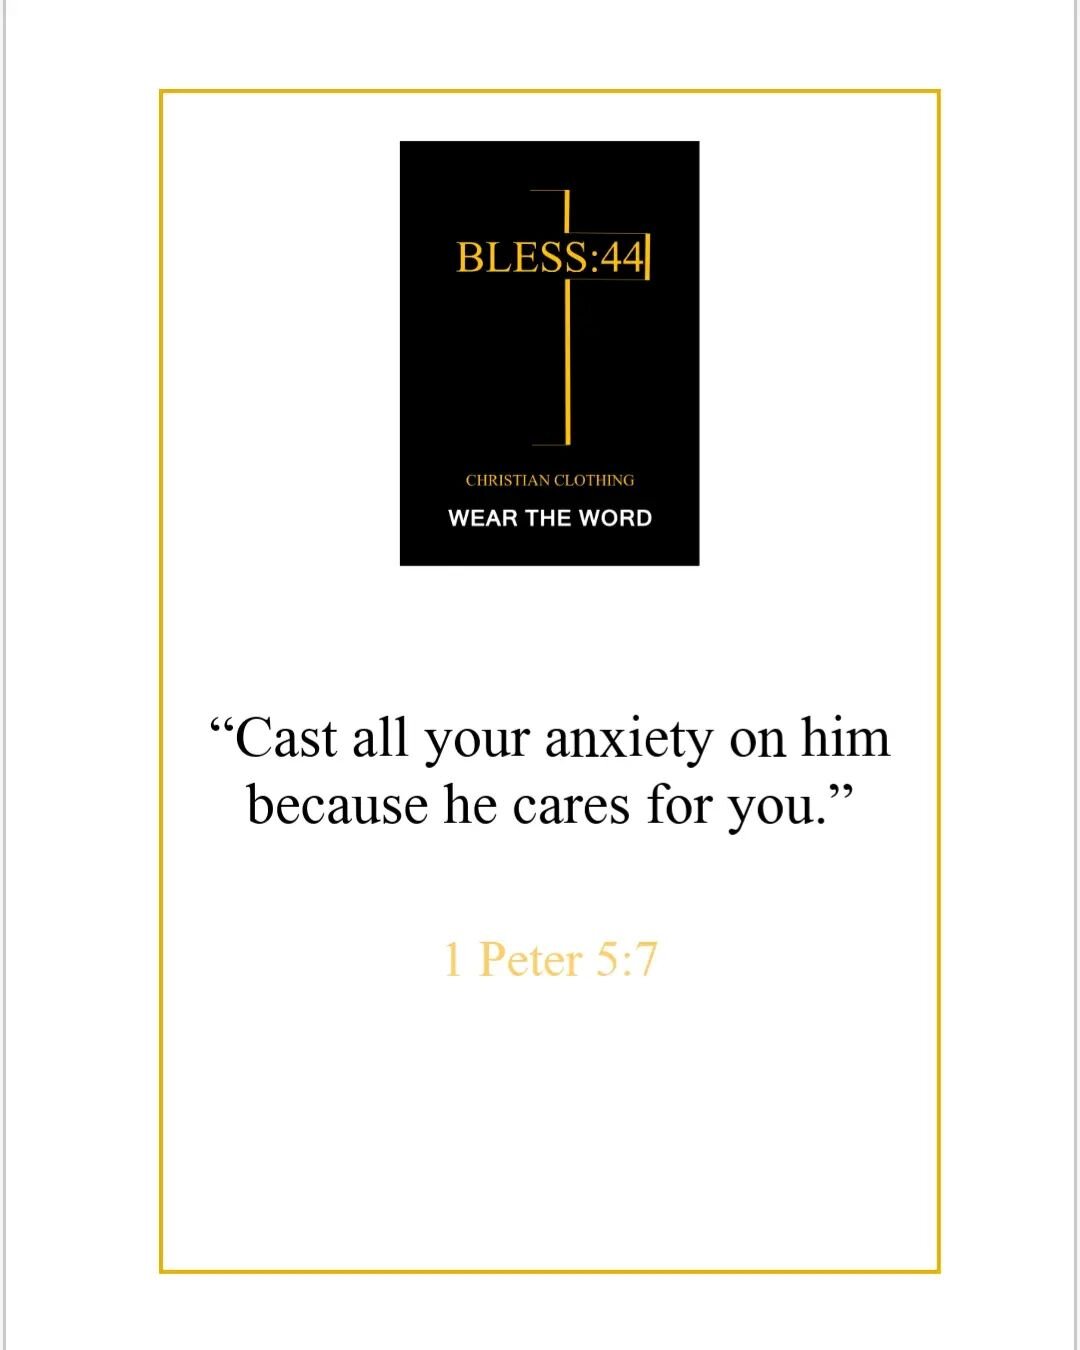 All your anxieties, not just some.... 1 Peter 5:7
#1peter57 #bibleverse #biblequote #christian #christianlifestyle #faithful